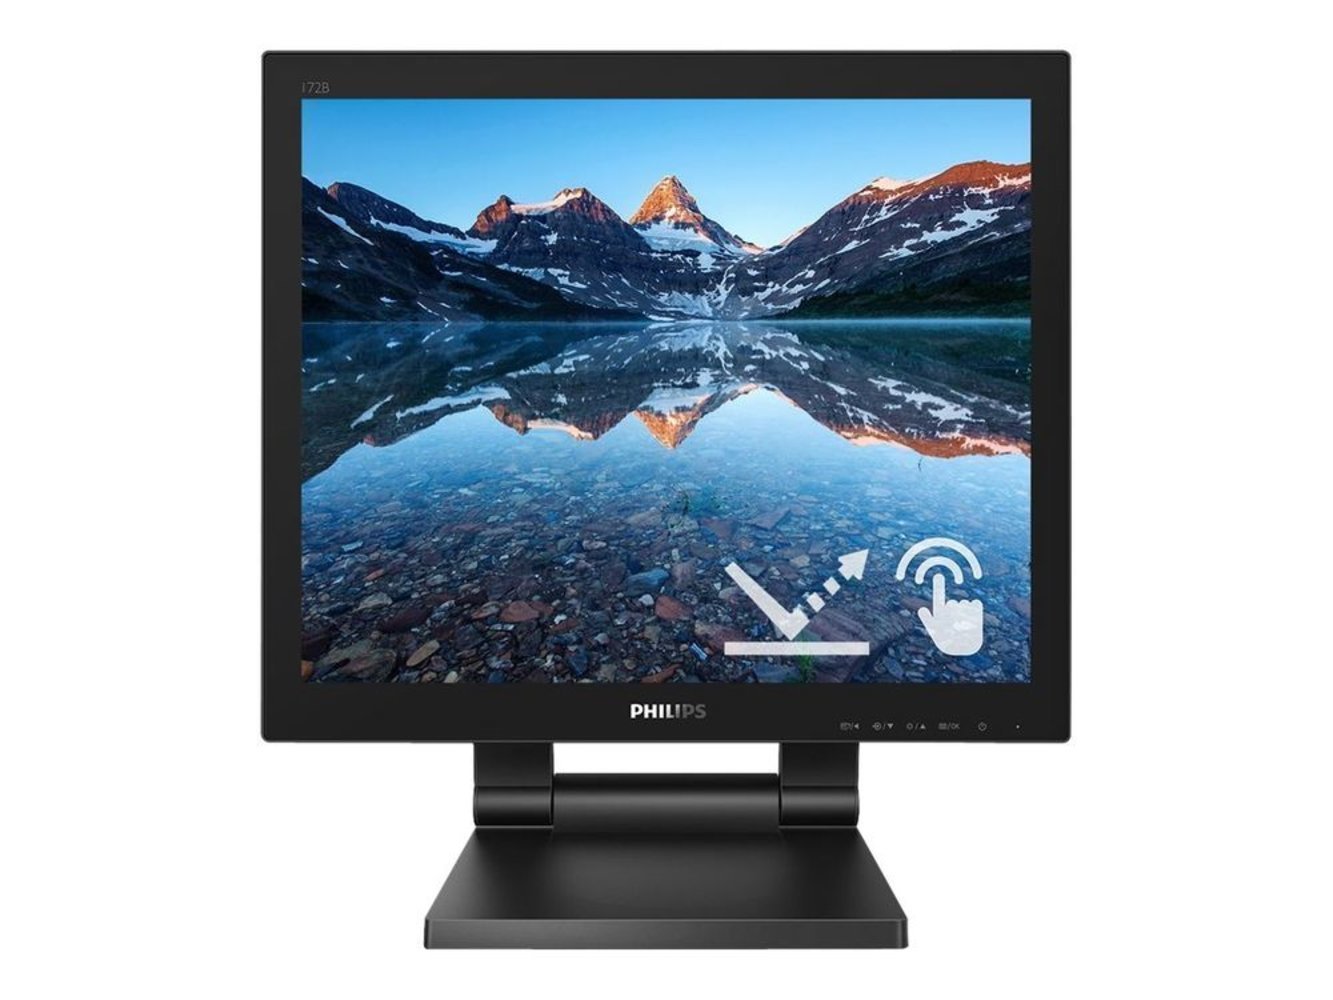 PHILIPS 172B9TL/00 B-Line 43.2cm 17 Zoll LCD monitor with SmoothTouch HDMI USB Audio